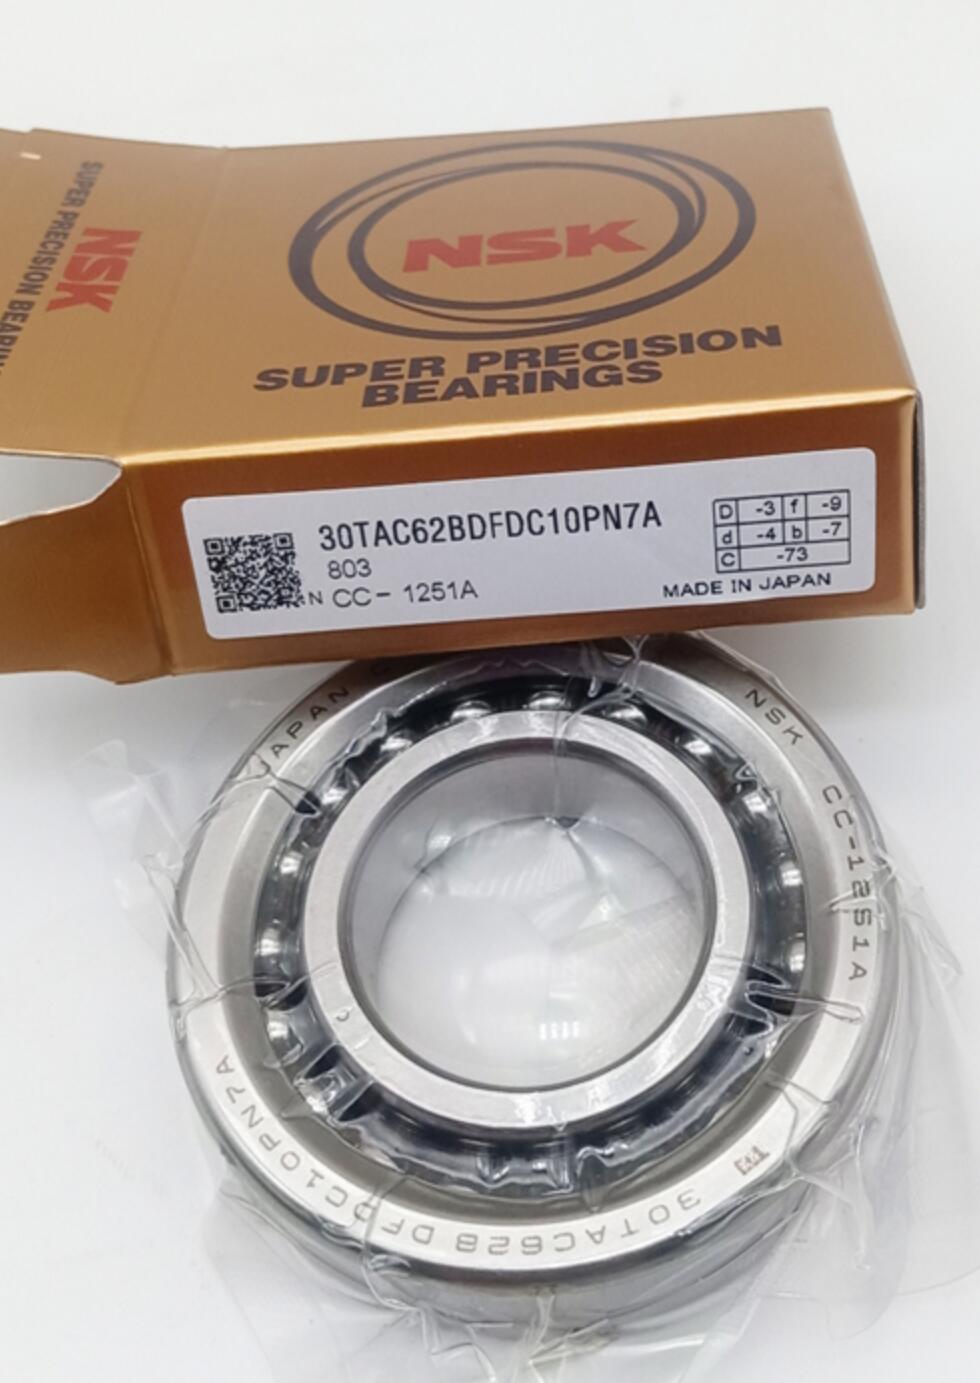 DALUO 7213AC P5 DF Precision Angular Contact Ball Bearings 25°Contact Angle DF Arrangement Face to Face P5 ABEC-5 Phenolic Resin Cage 